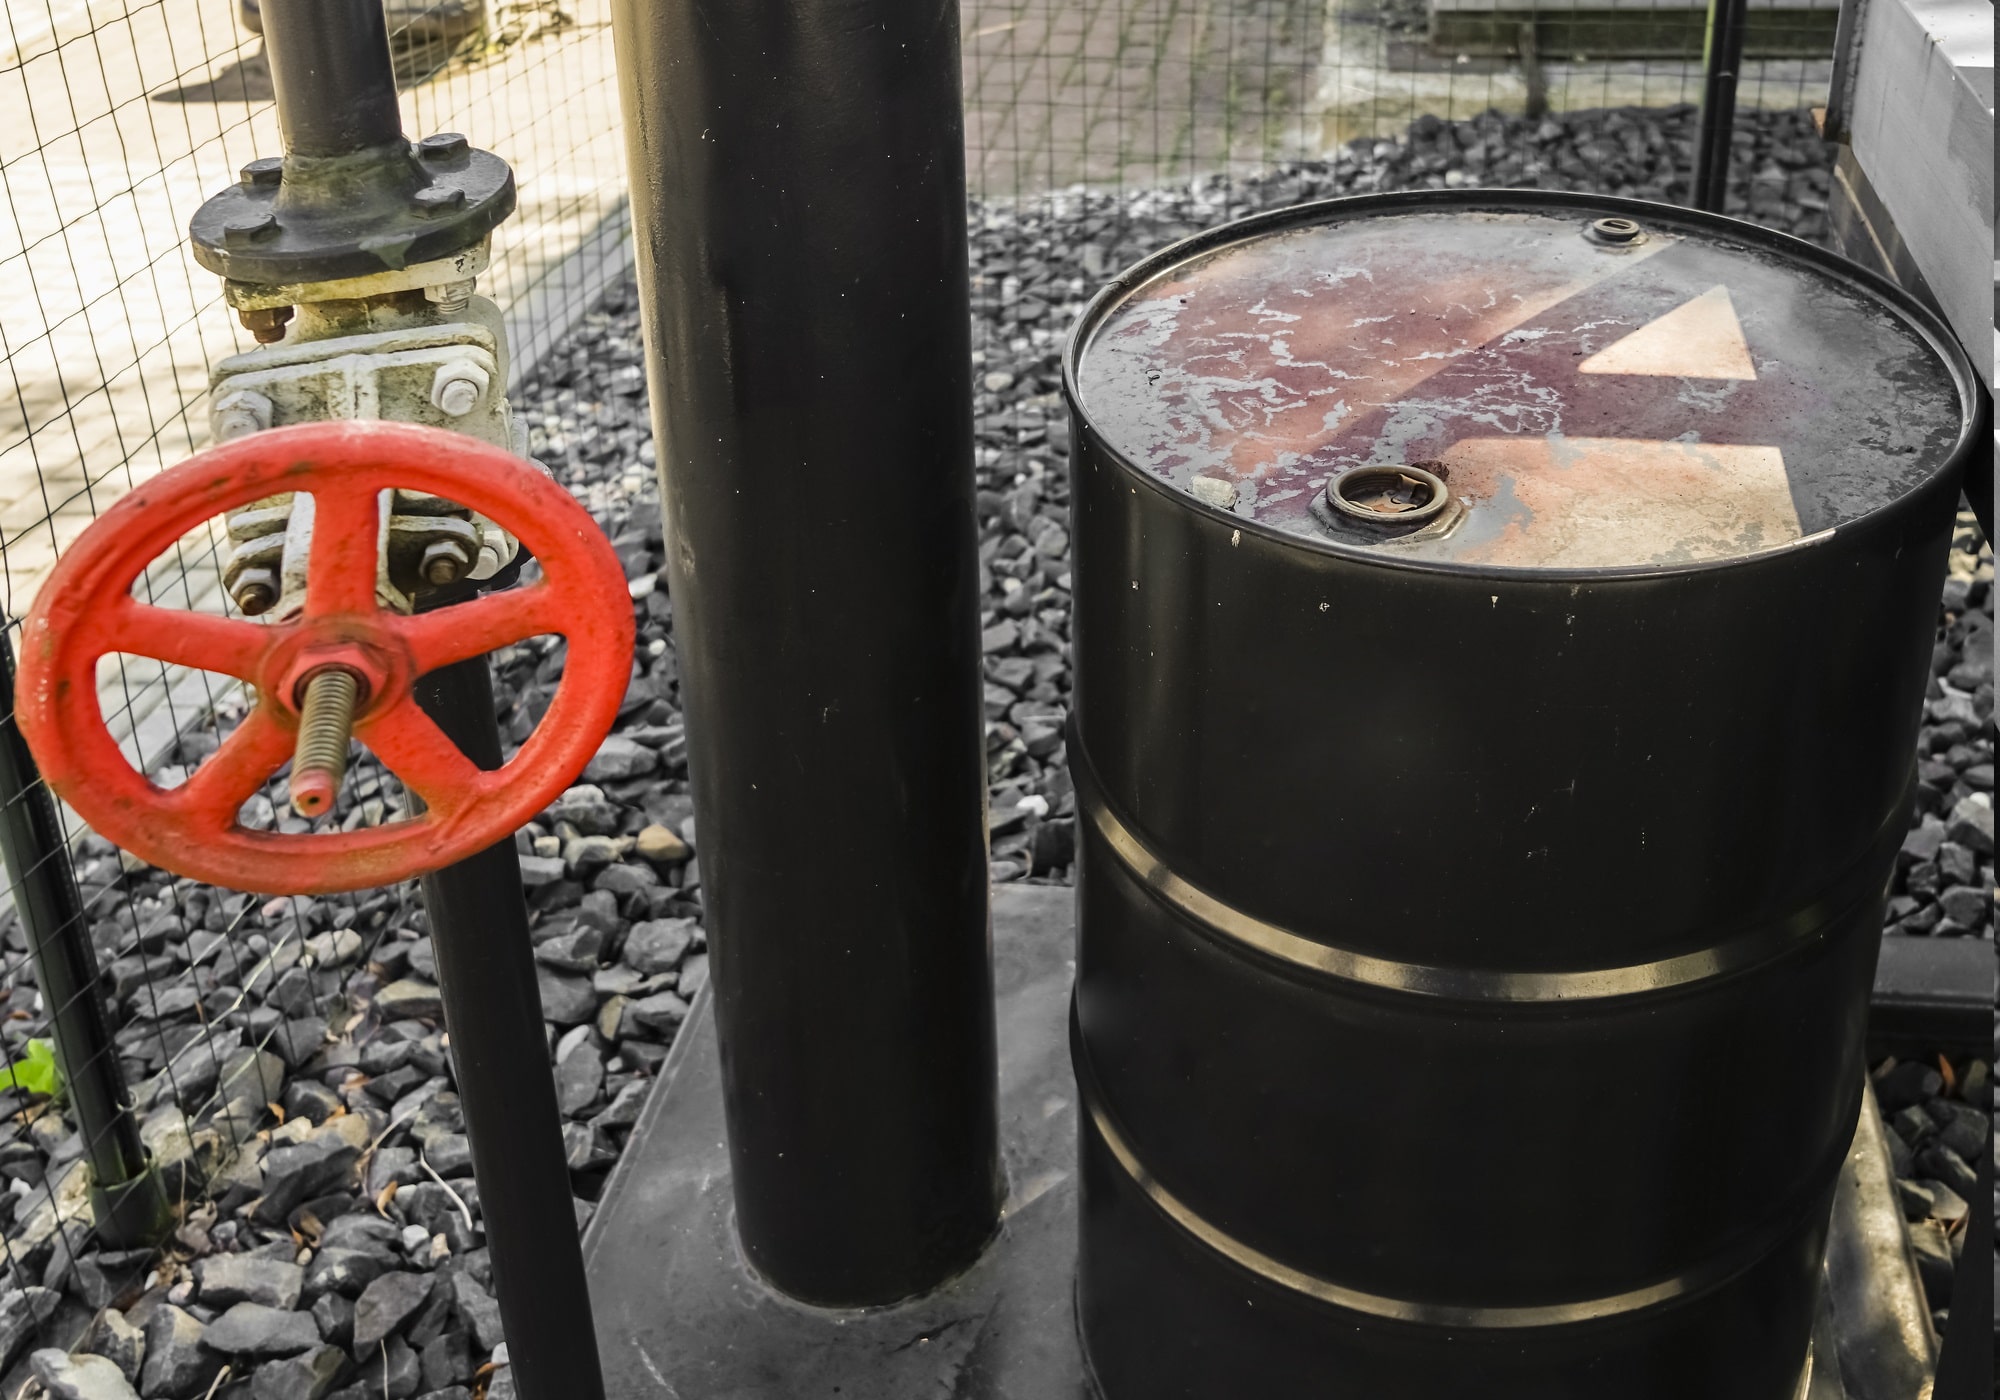 Black pipe and red valve near oil barrel.